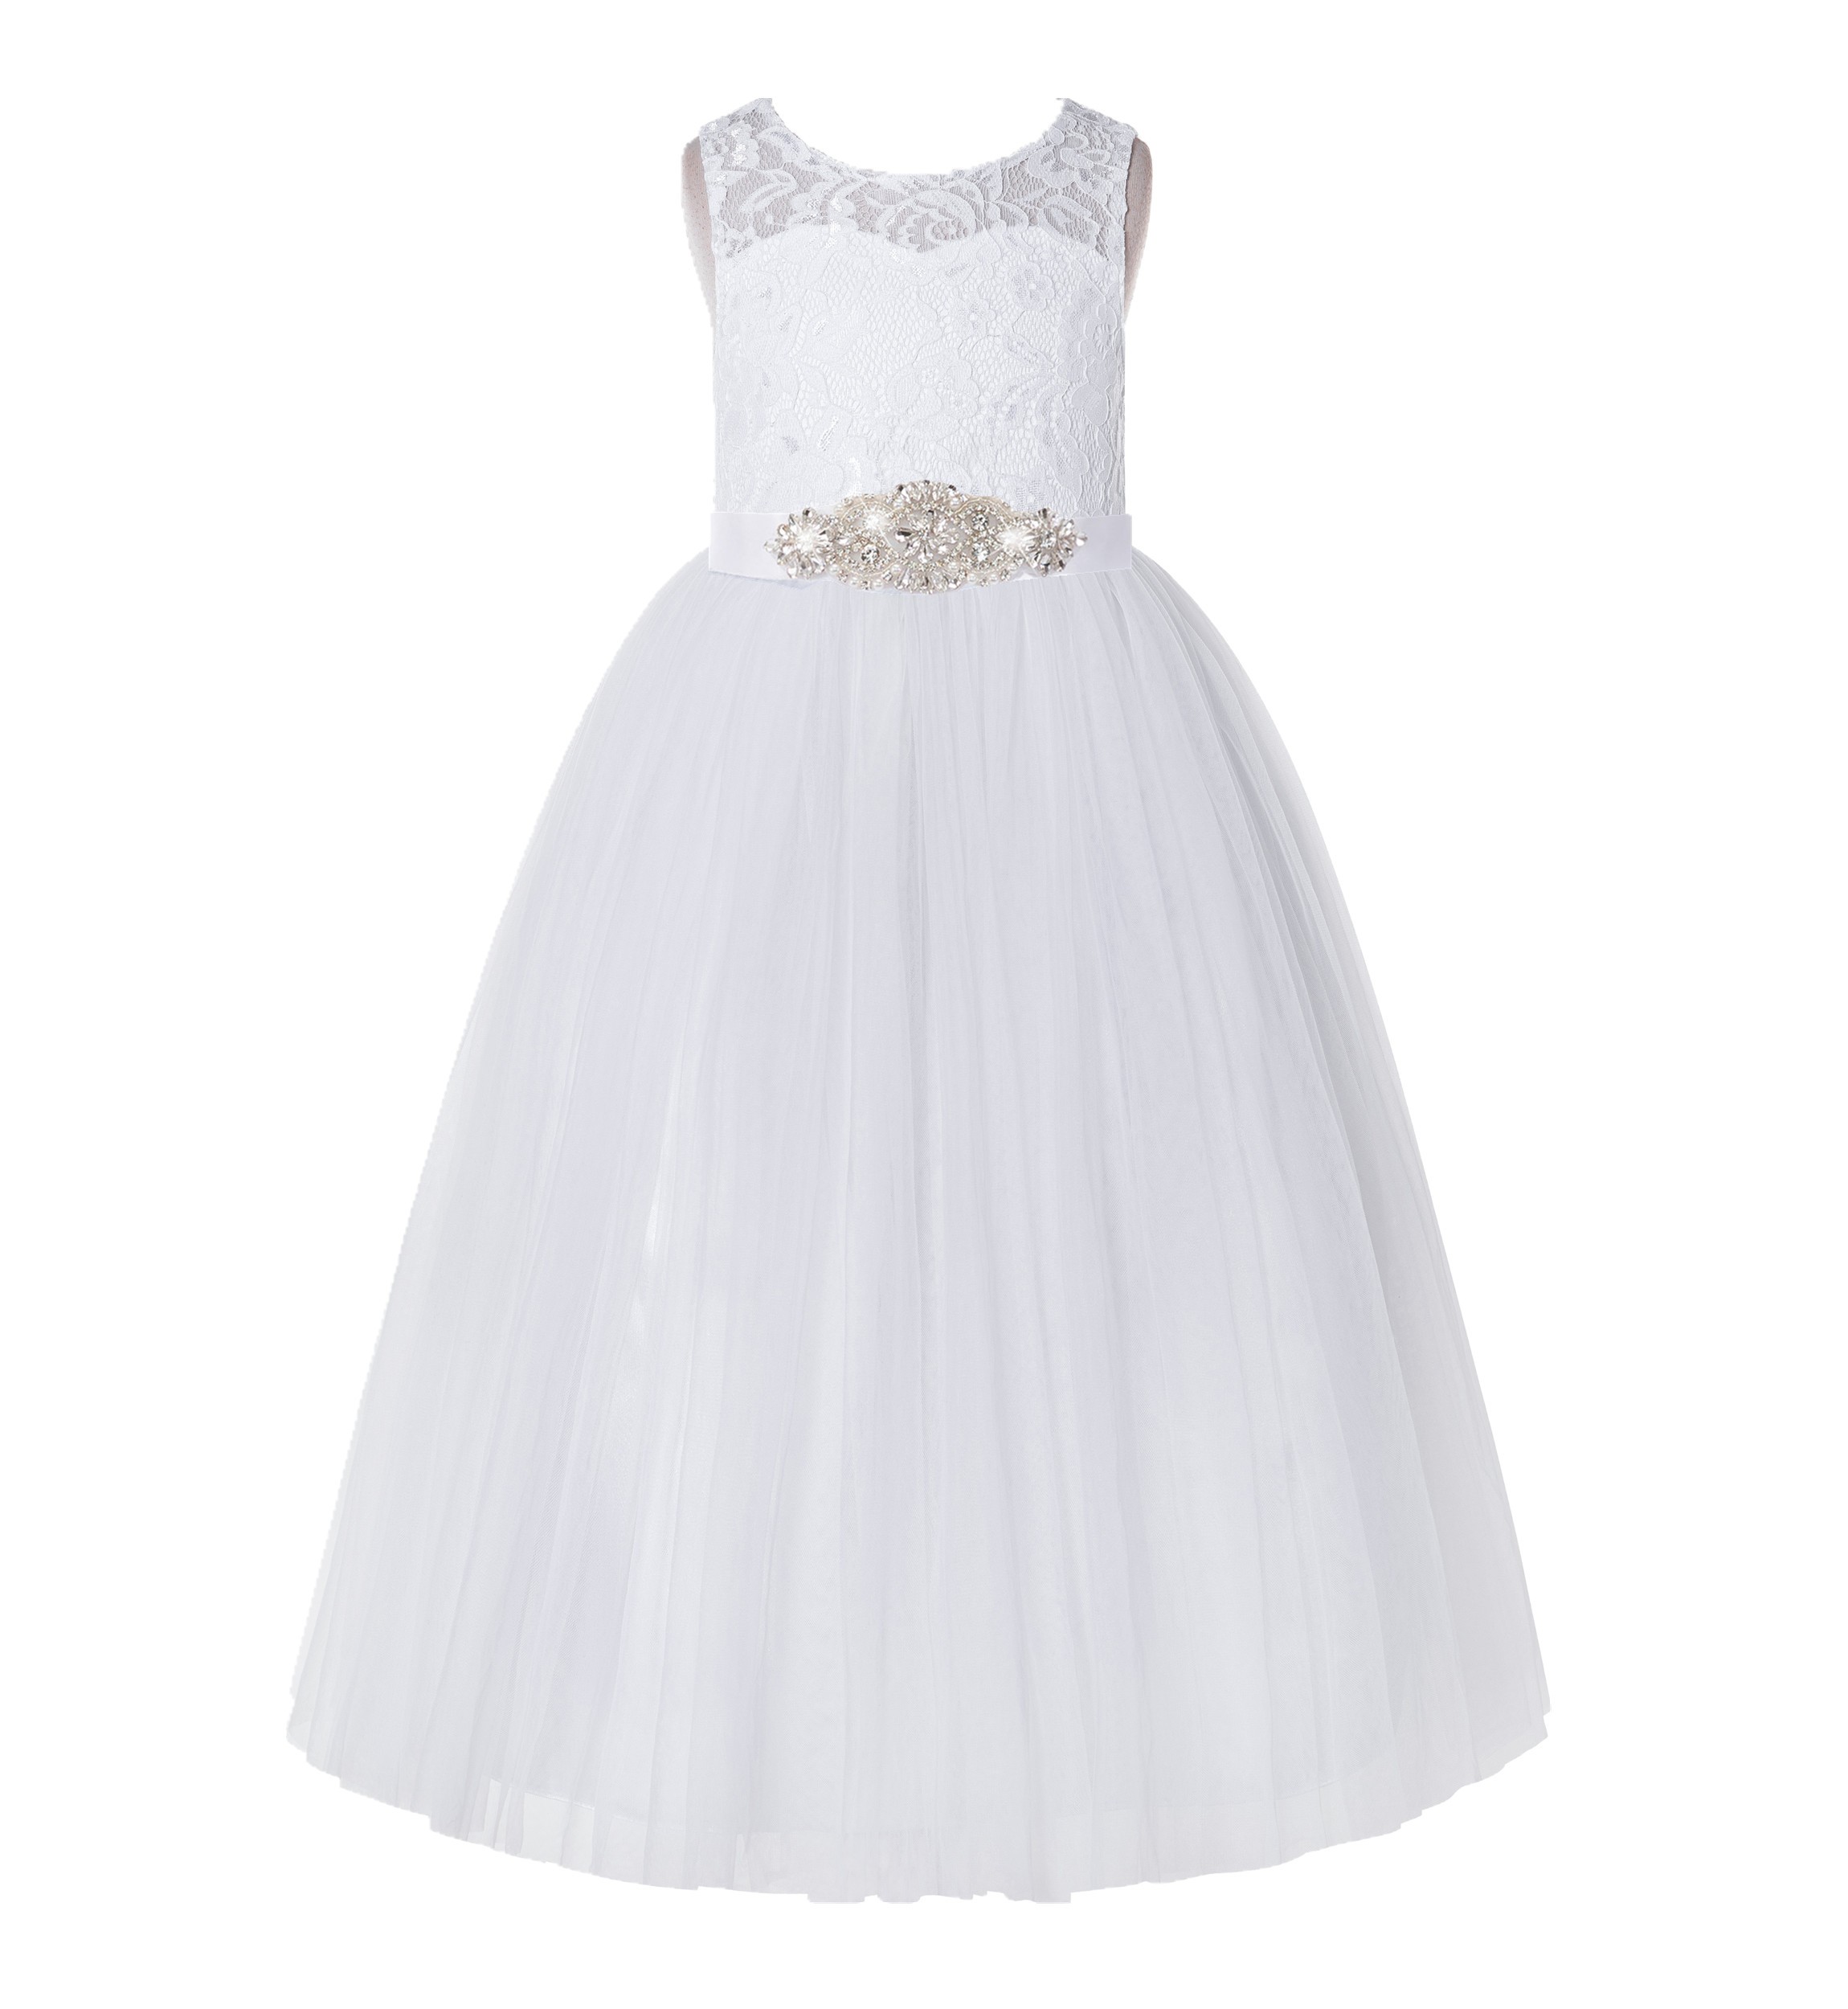 White A-Line Lace Flower Girl Dress 178R3